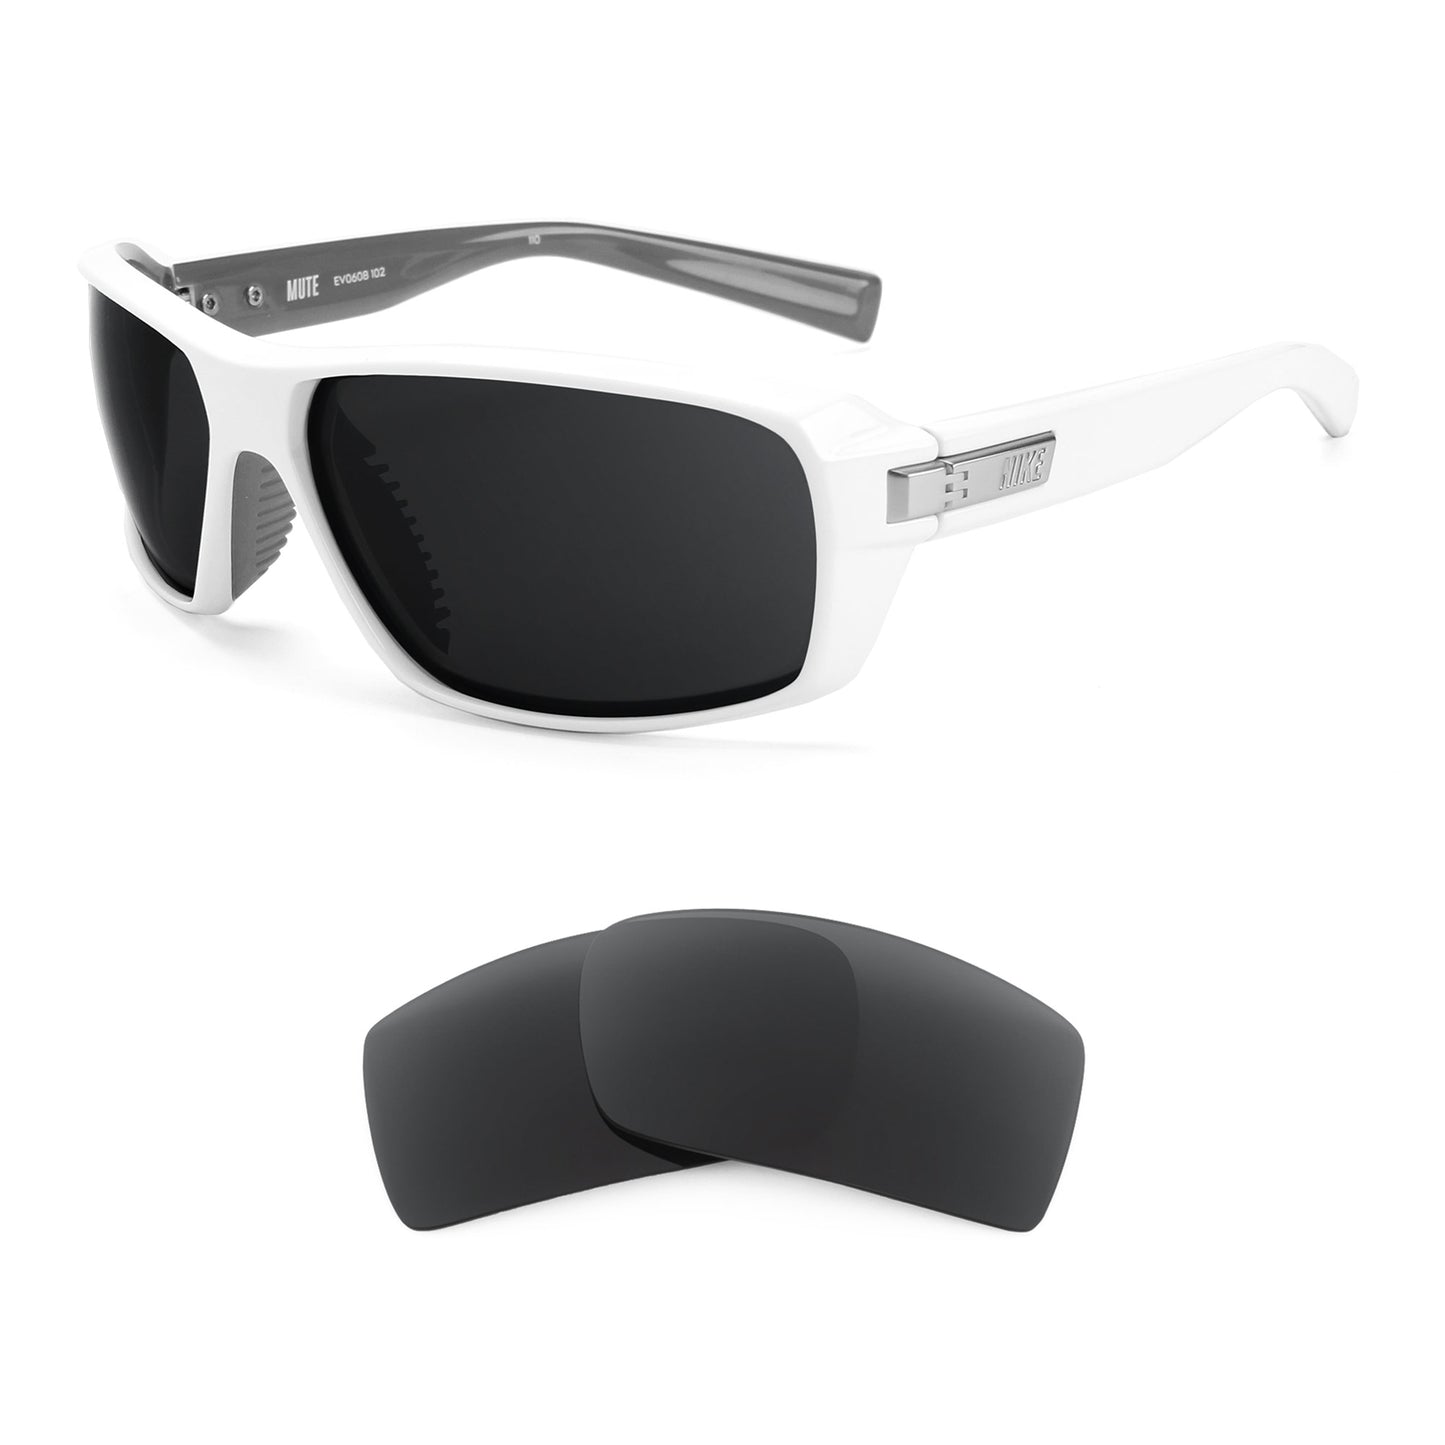 Nike Mute sunglasses with replacement lenses